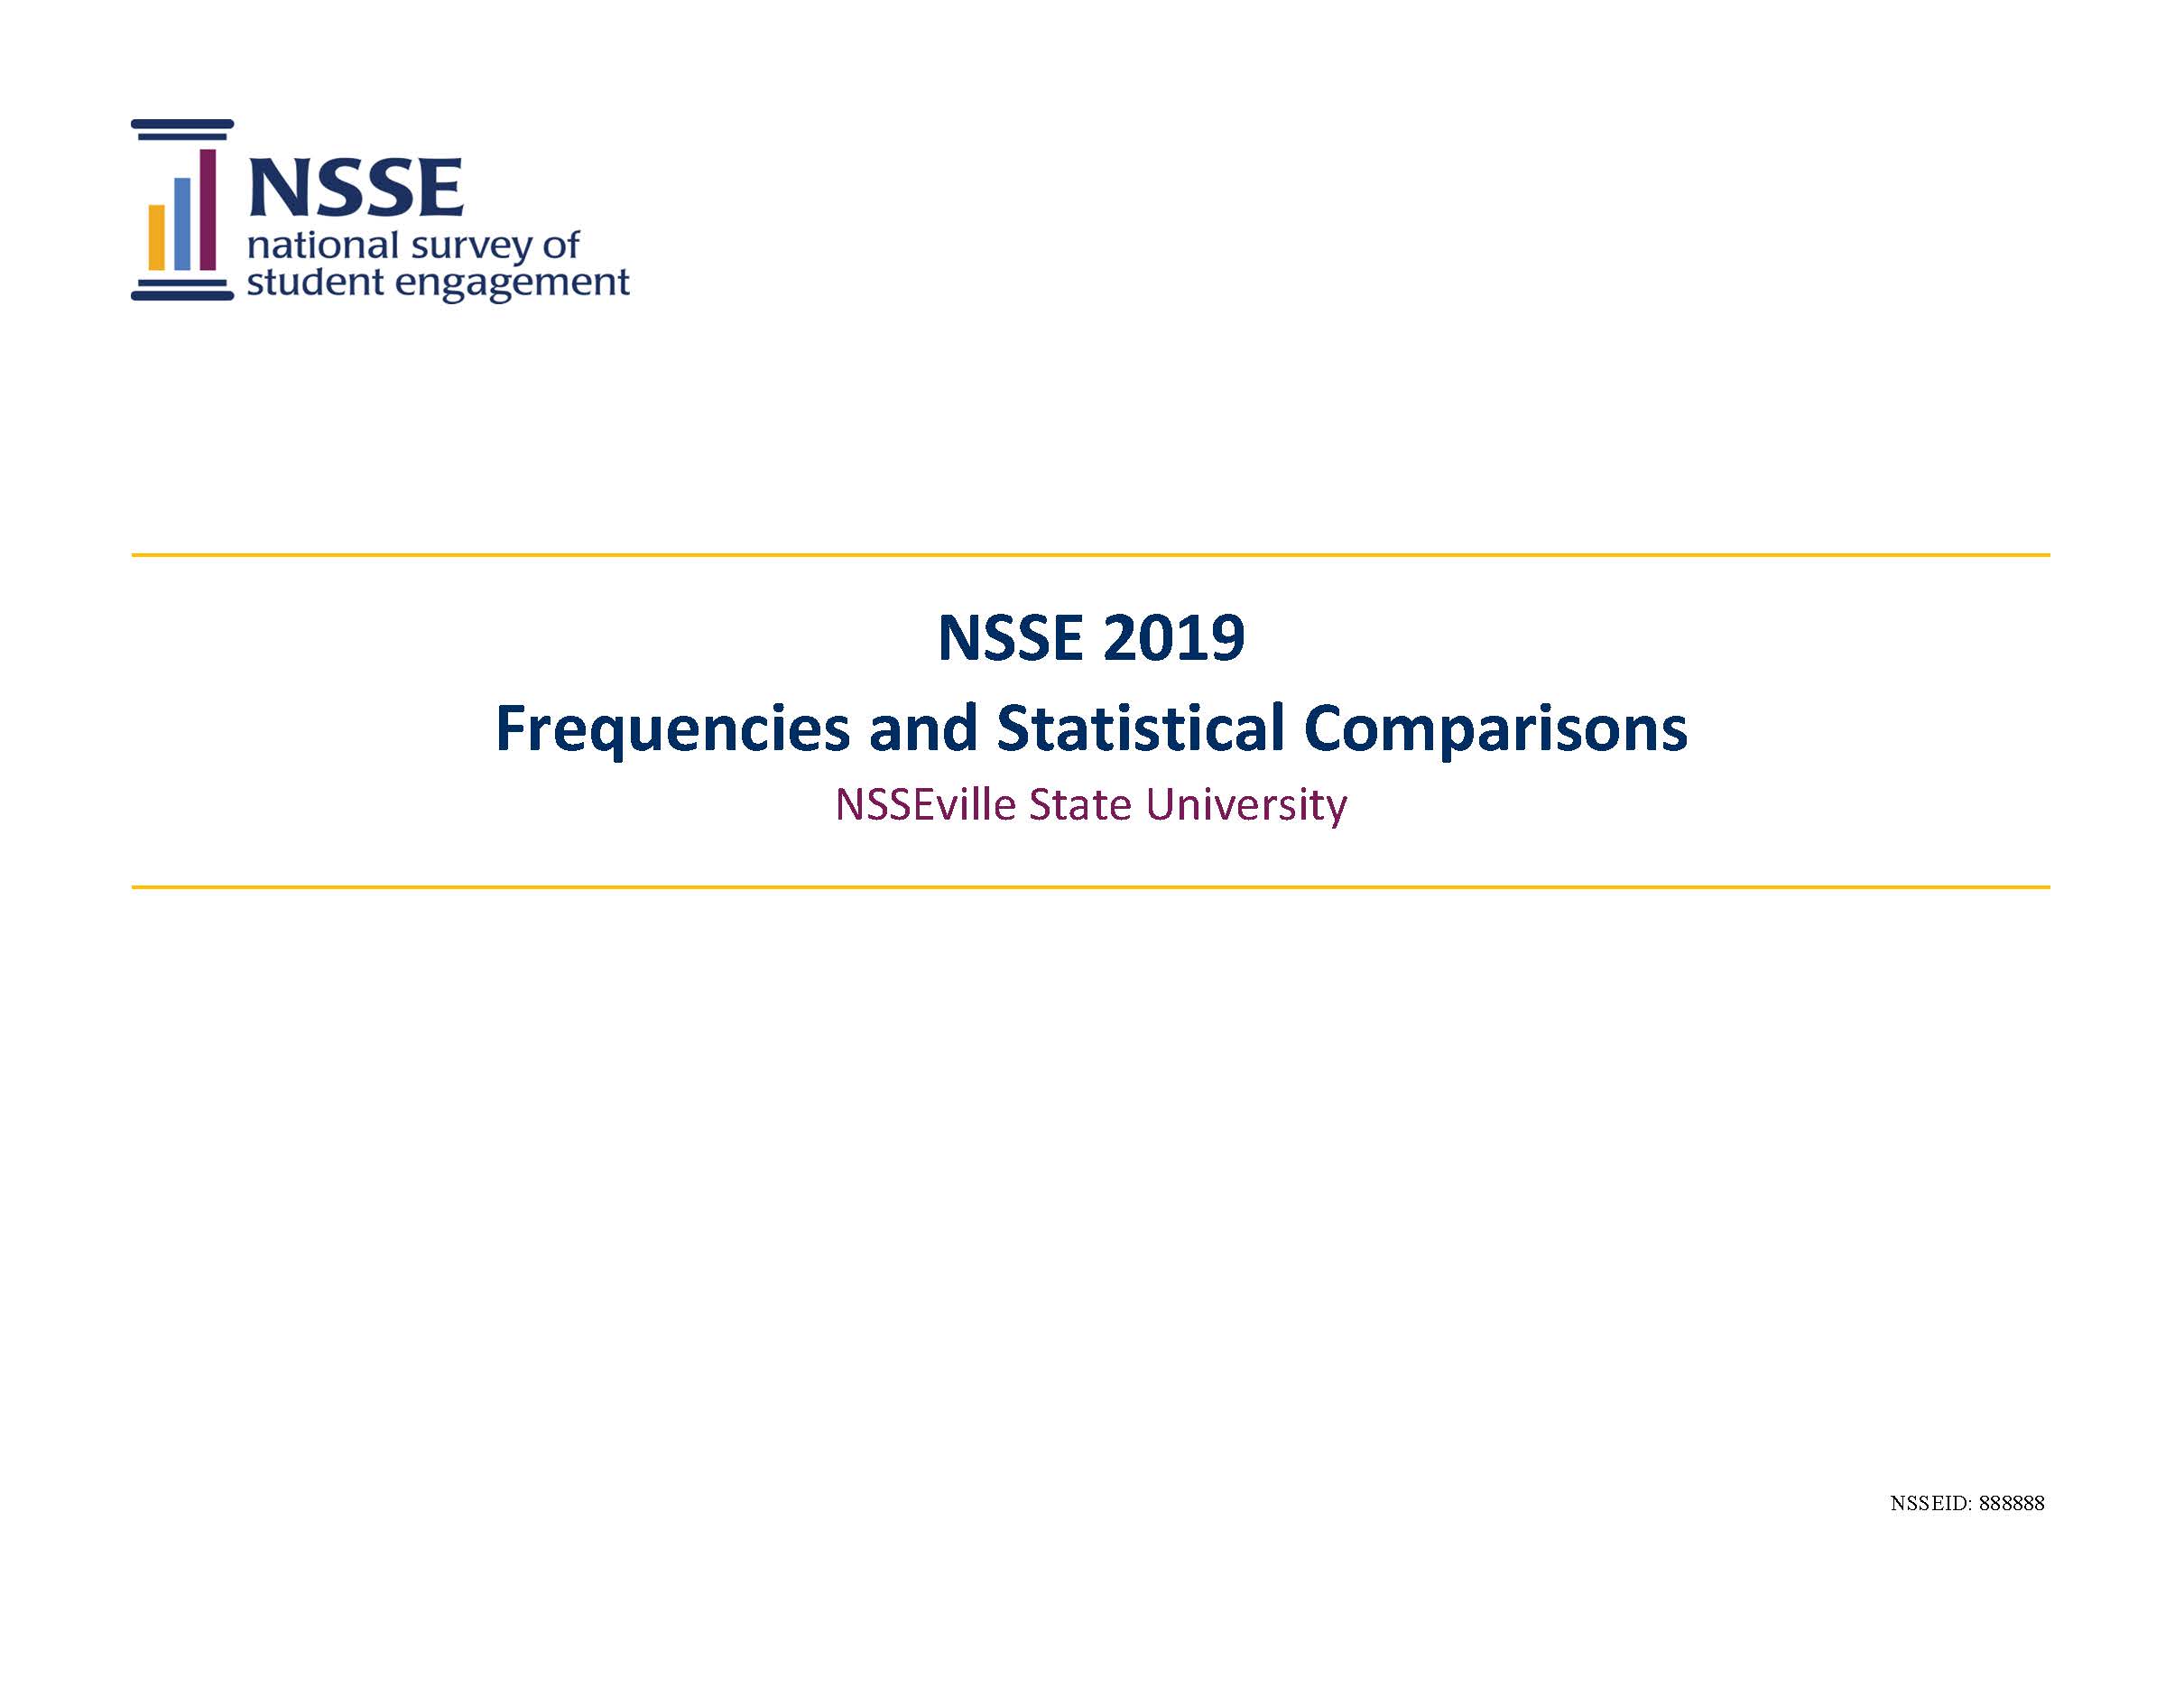 Sample Report: page 1 of NSSE Frequencies and Statistical Comparisons